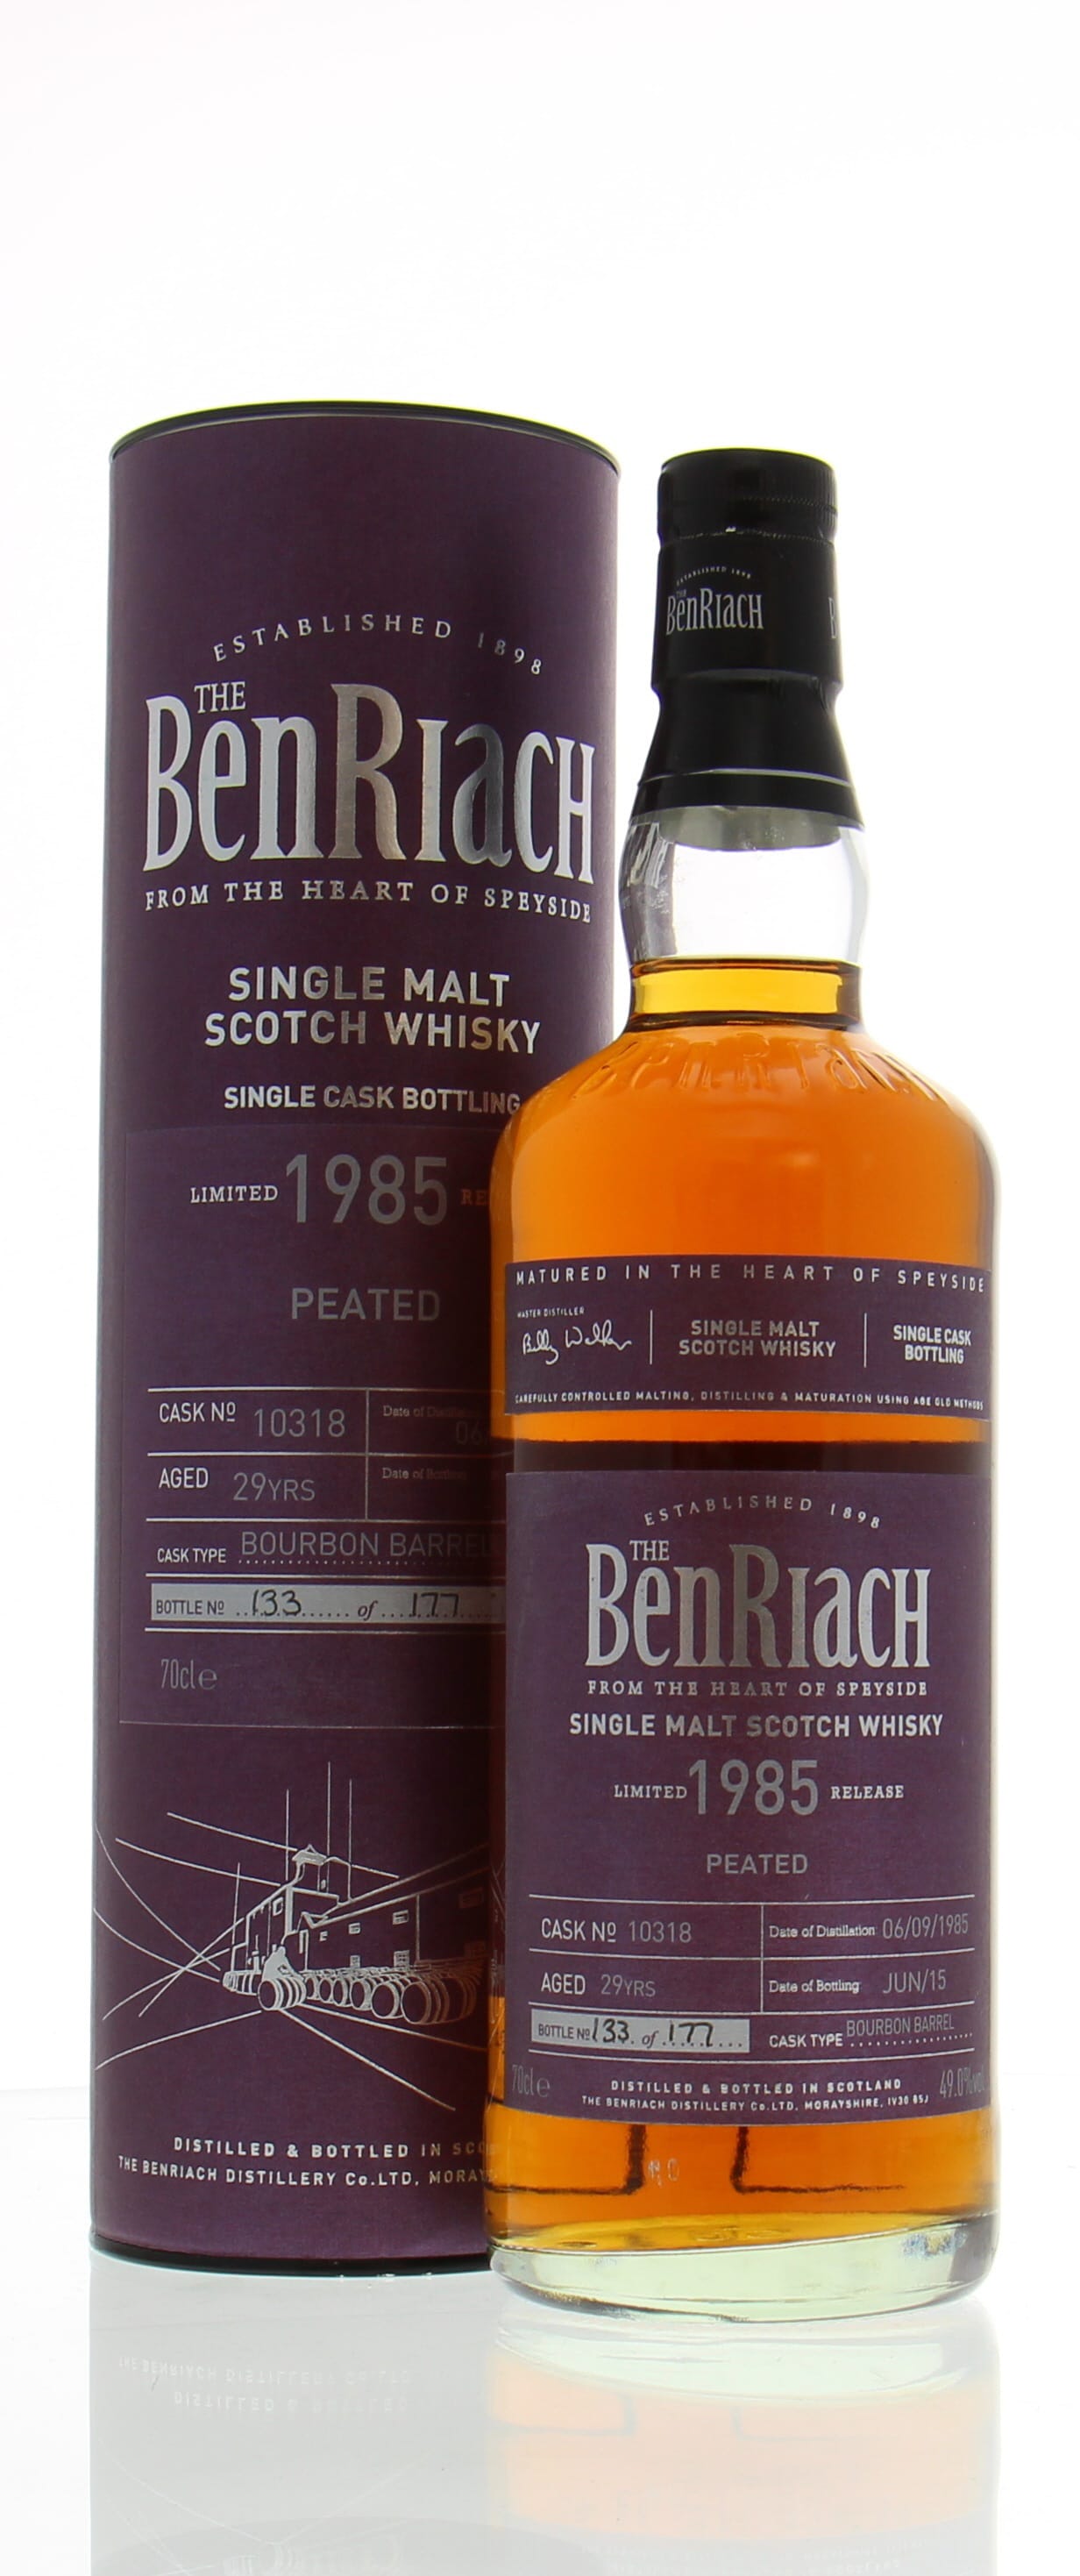 Benriach - 29 Years Old Batch 12 Peated Cask:10318 49% 1985 In Original Container